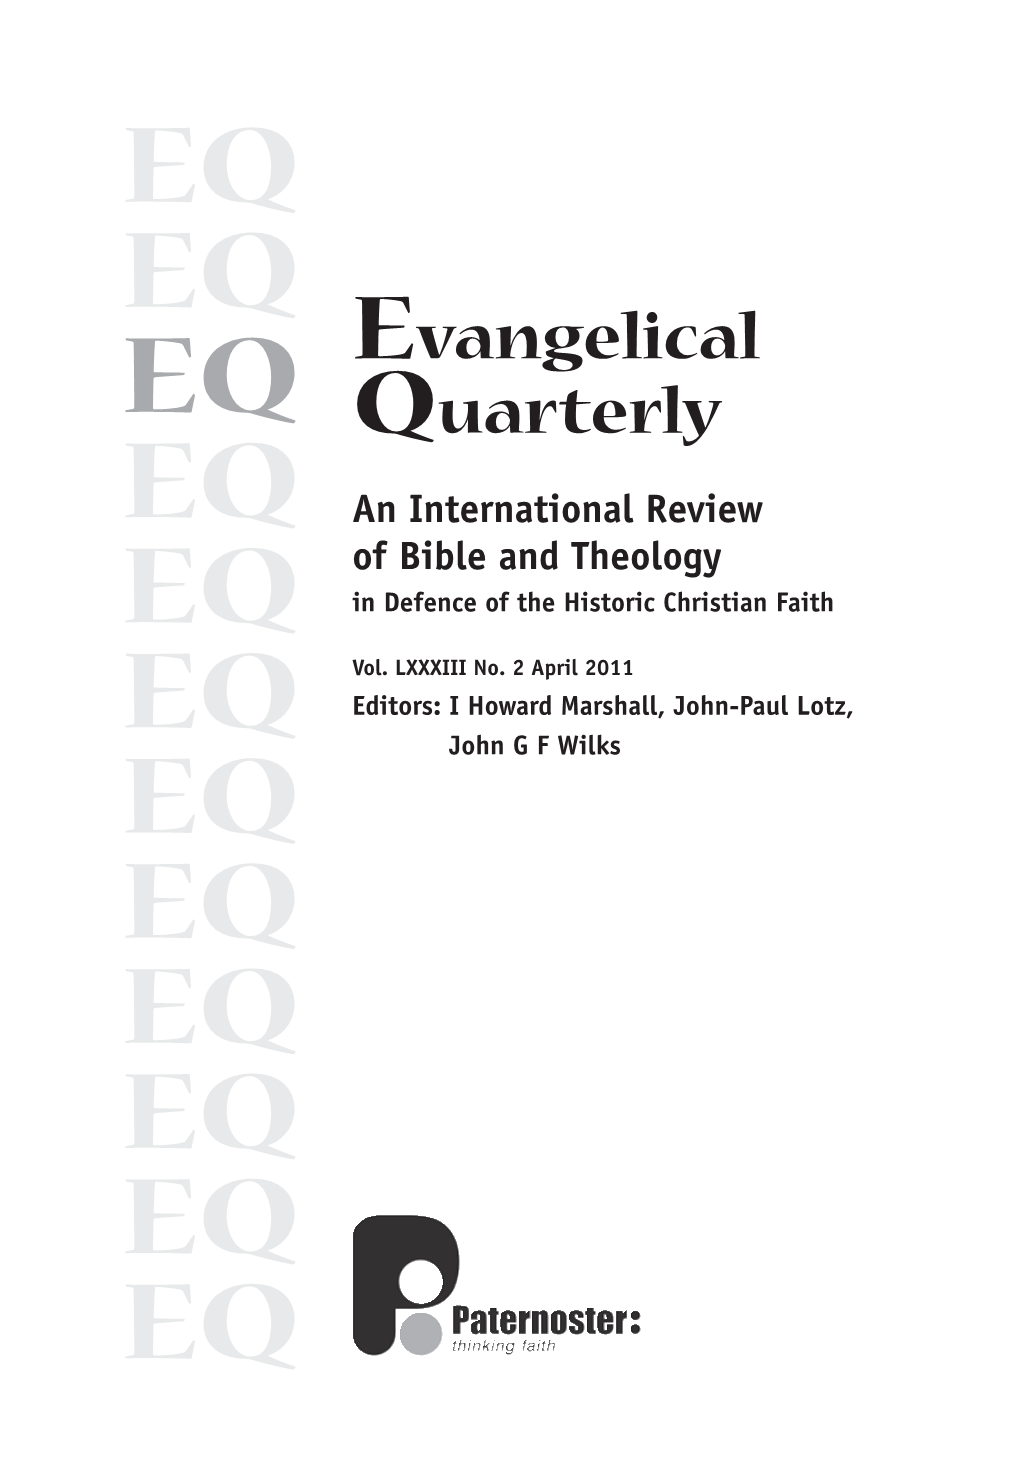 Brian C. Brewer, "Evangelical Anglicanism: John Wesley's